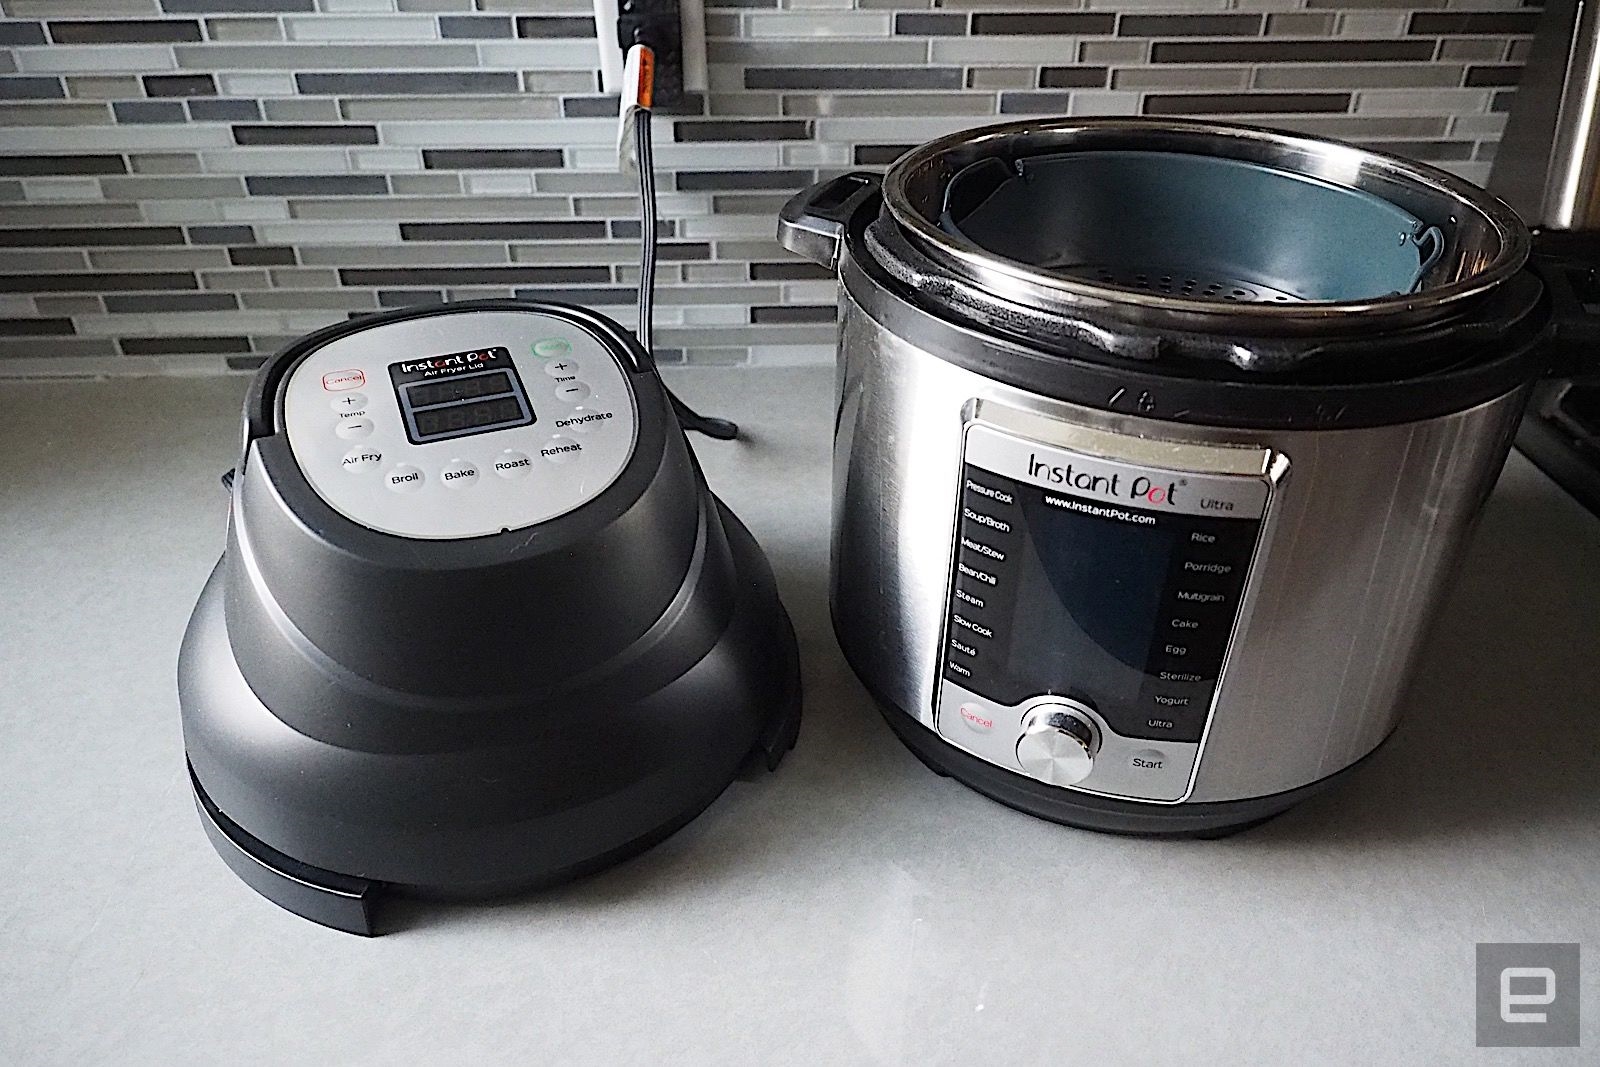 How to make the most of that Instant Pot you just bought | DeviceDaily.com